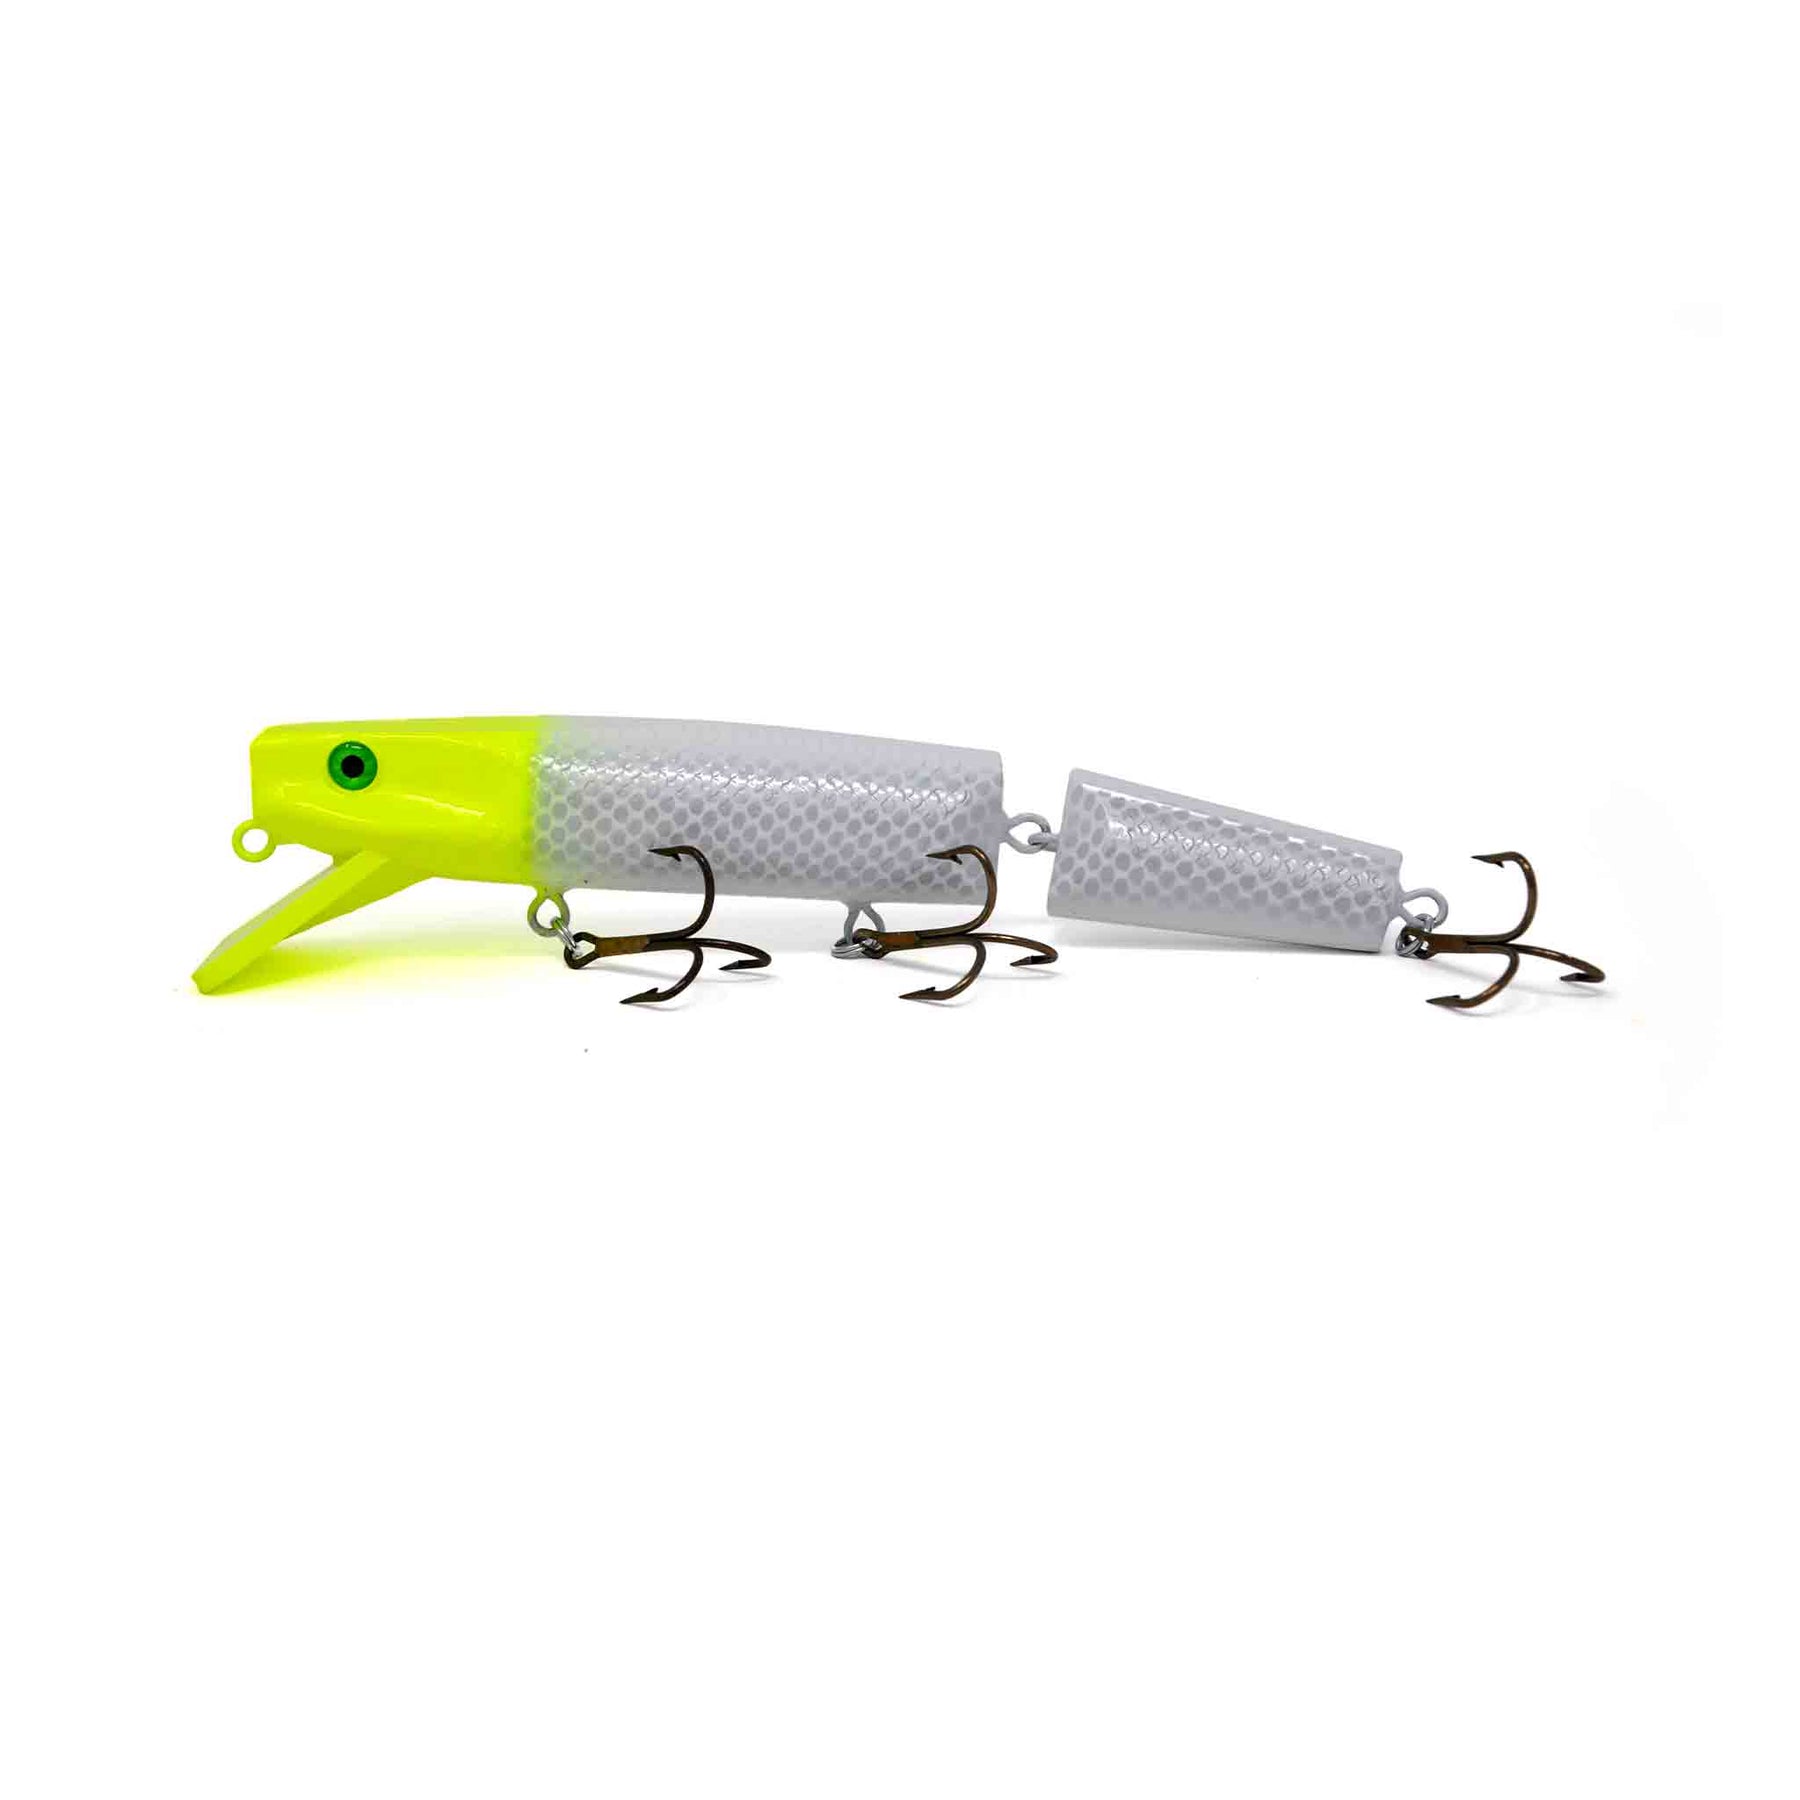 MuskieFIRST  Lure ID? » Lures,Tackle, and Equipment » Muskie Fishing